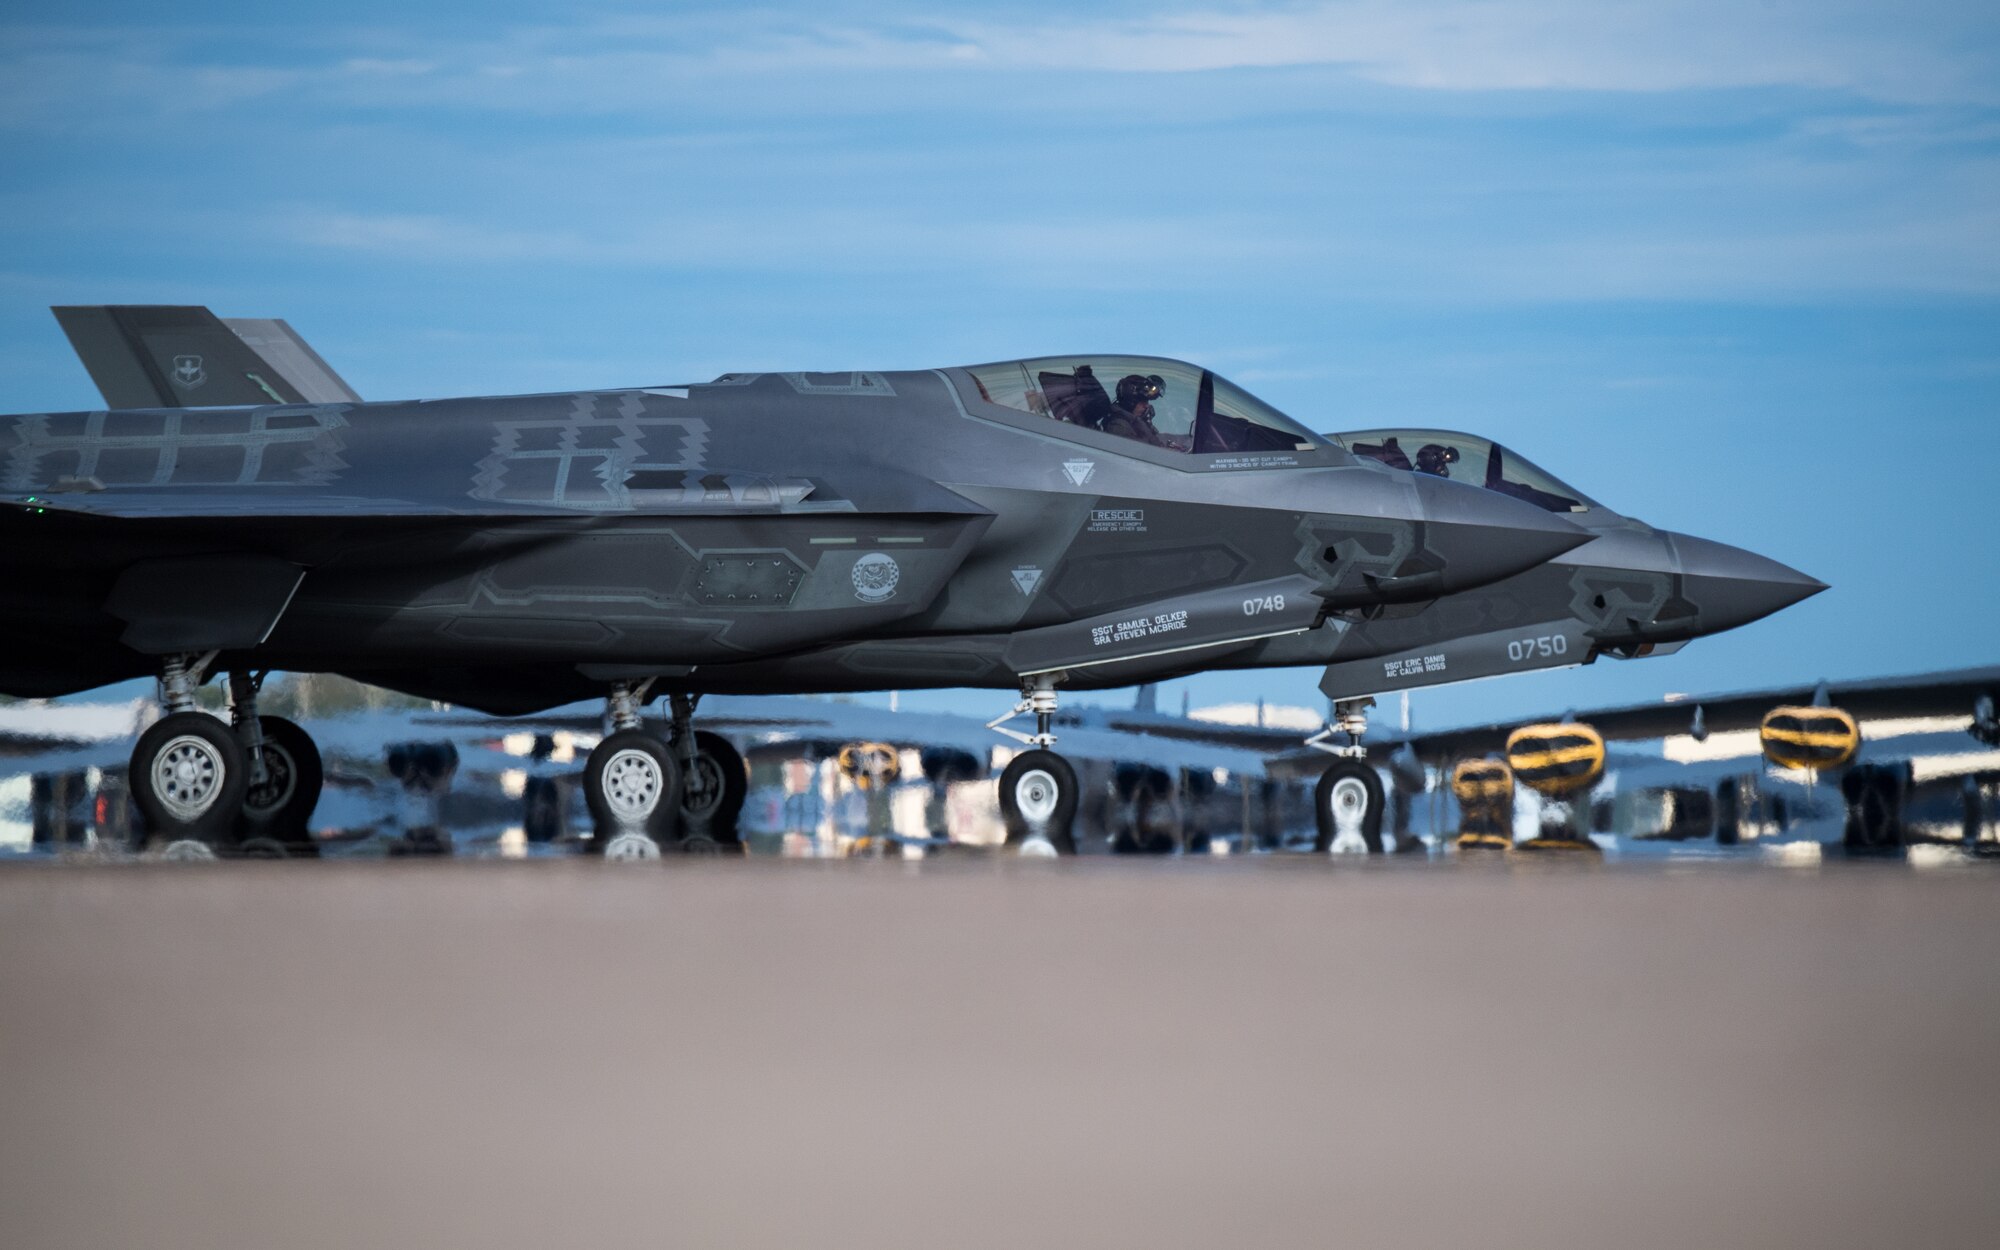 F-35 Lightning aircraft from Eglin Air Force Base, Fla., prepare for takeoff at Barksdale Air Force Base, La., Oct. 12, 2018. The aircraft evacuated to Barksdale to avoid possible damage from Hurricane Michael. (U.S. Air Force photo by Airman 1st Class Lillian Miller)